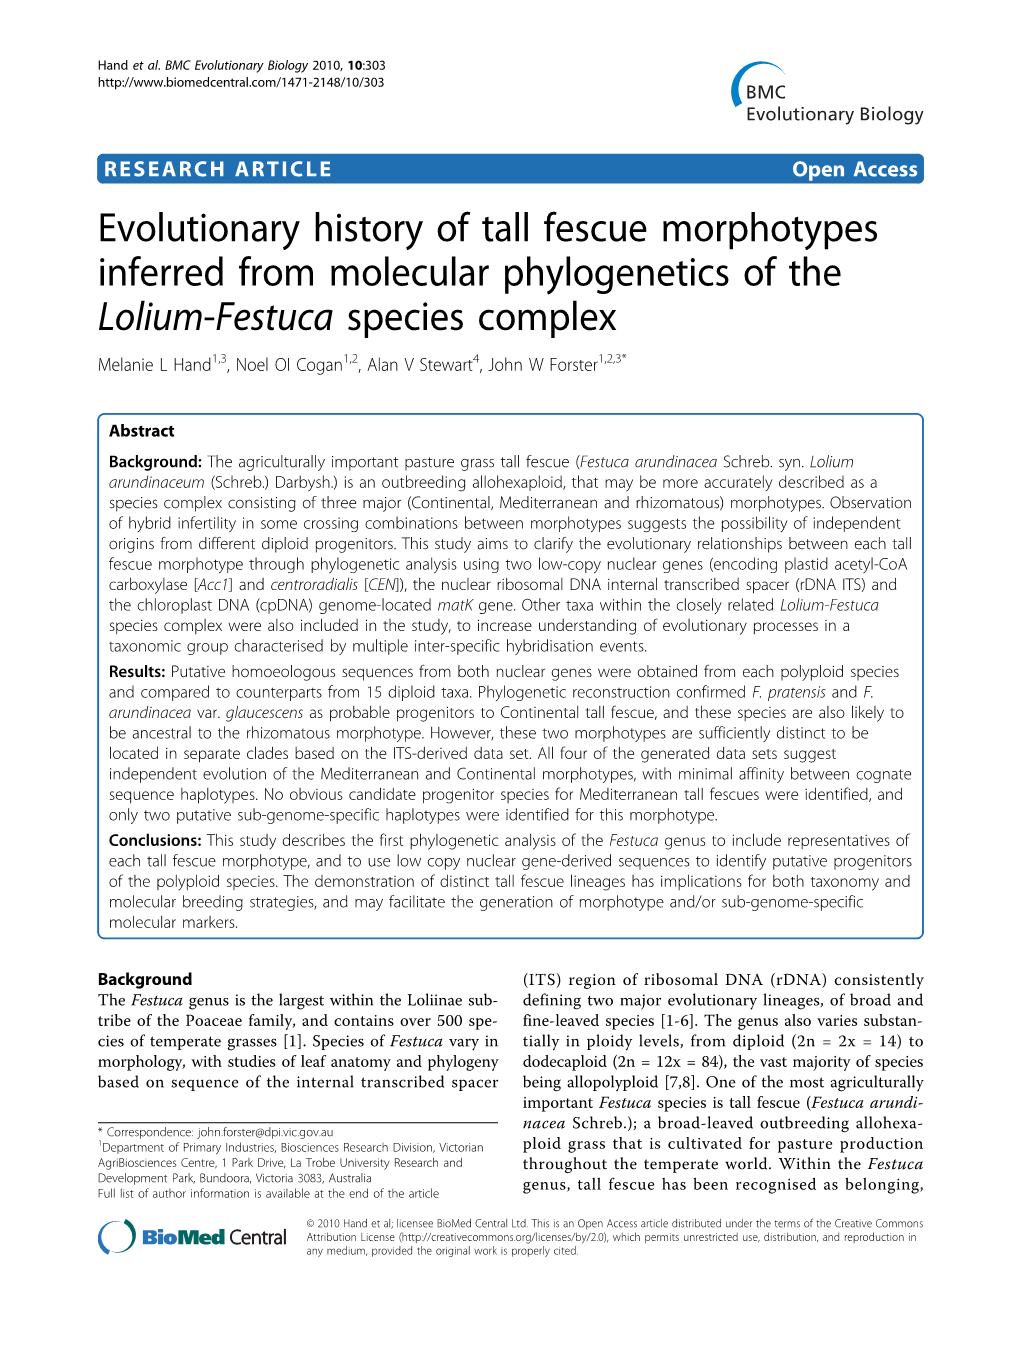 Evolutionary History of Tall Fescue Morphotypes Inferred From